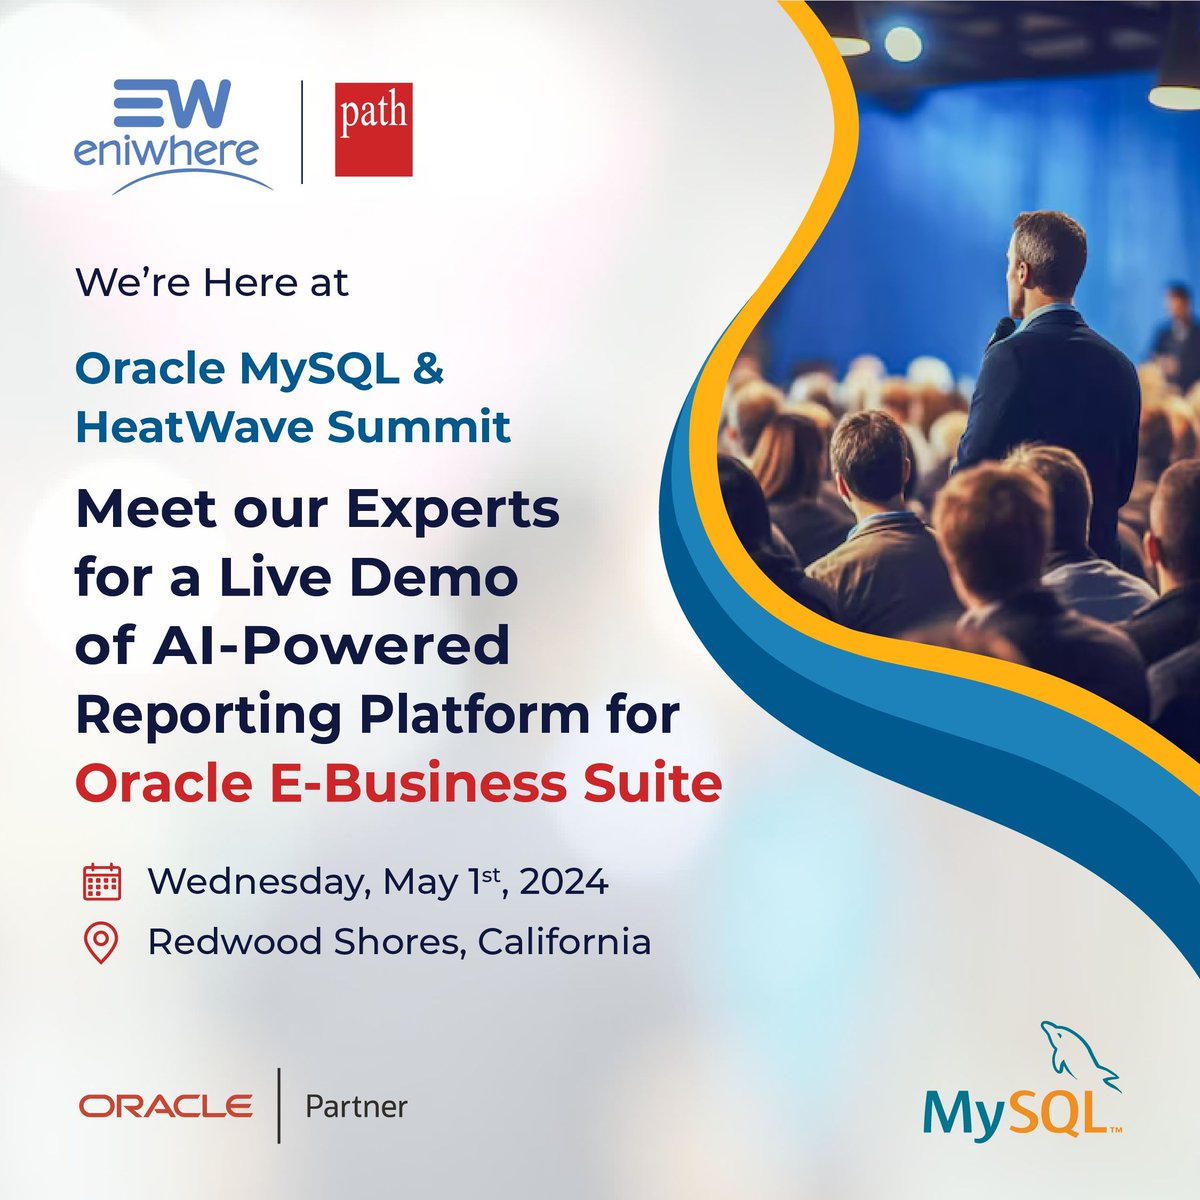 We're here at #Oracle #MySQL Hosted – 2024 Summit! 

Join us for live demos of our AI-powered #ReportingPlatform. Let's discuss how #eniwhere can elevate your Oracle E-Business Suite #reporting. 

See you at the #summit! 

#PathInfotech #MySQLSummit #OraclePartner #TechEvent